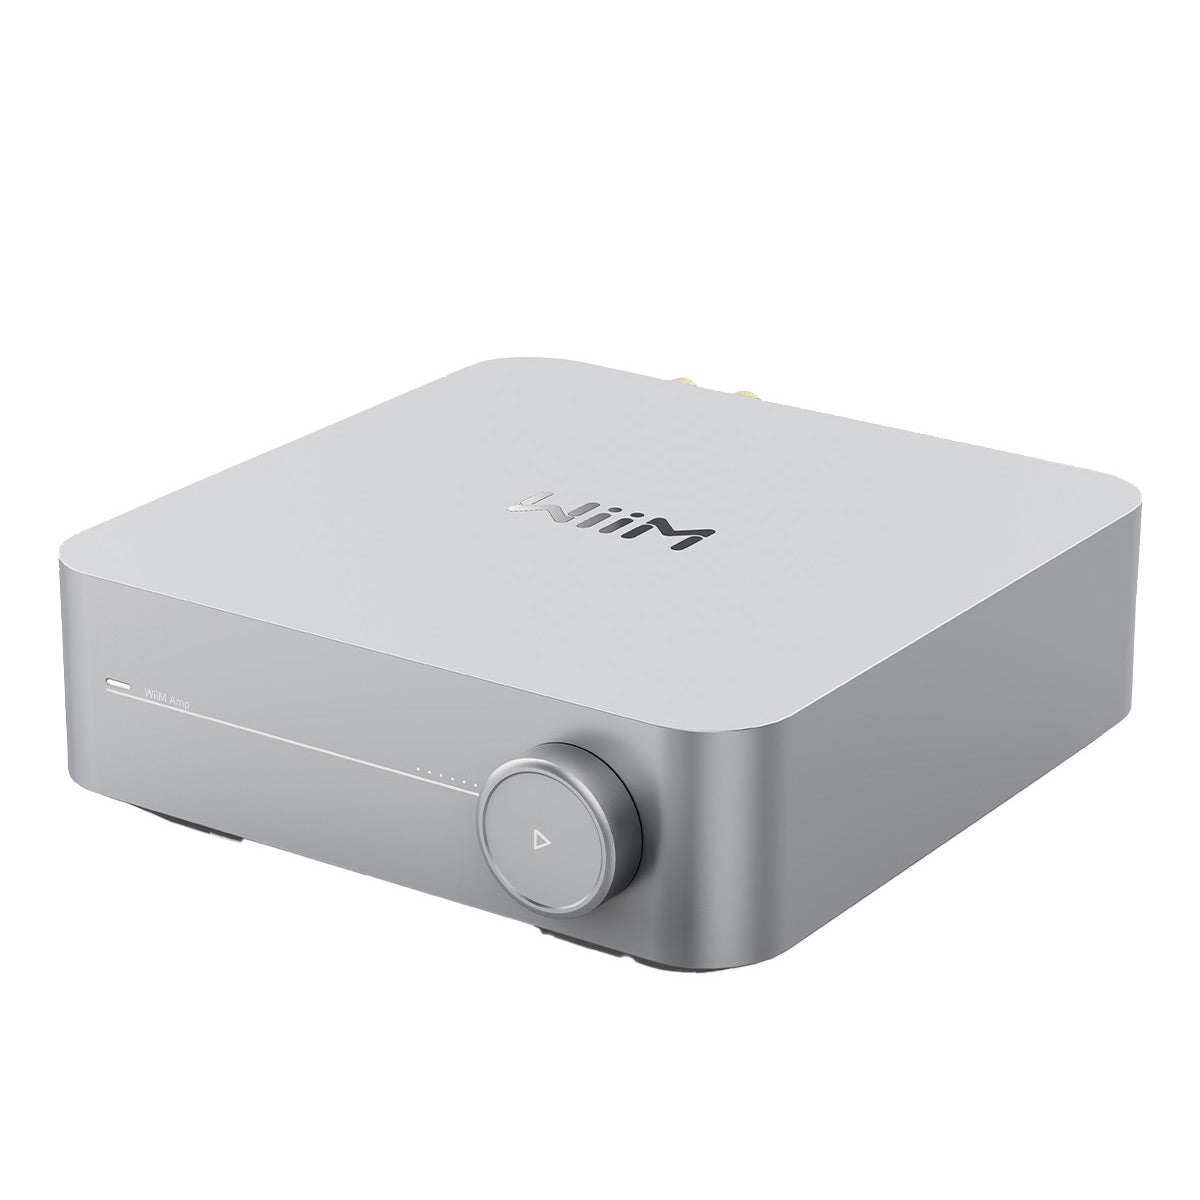 WiiM Amp Multiroom Streaming Amplifier with AirPlay 2, Chromecast, & Voice Control (Silver)